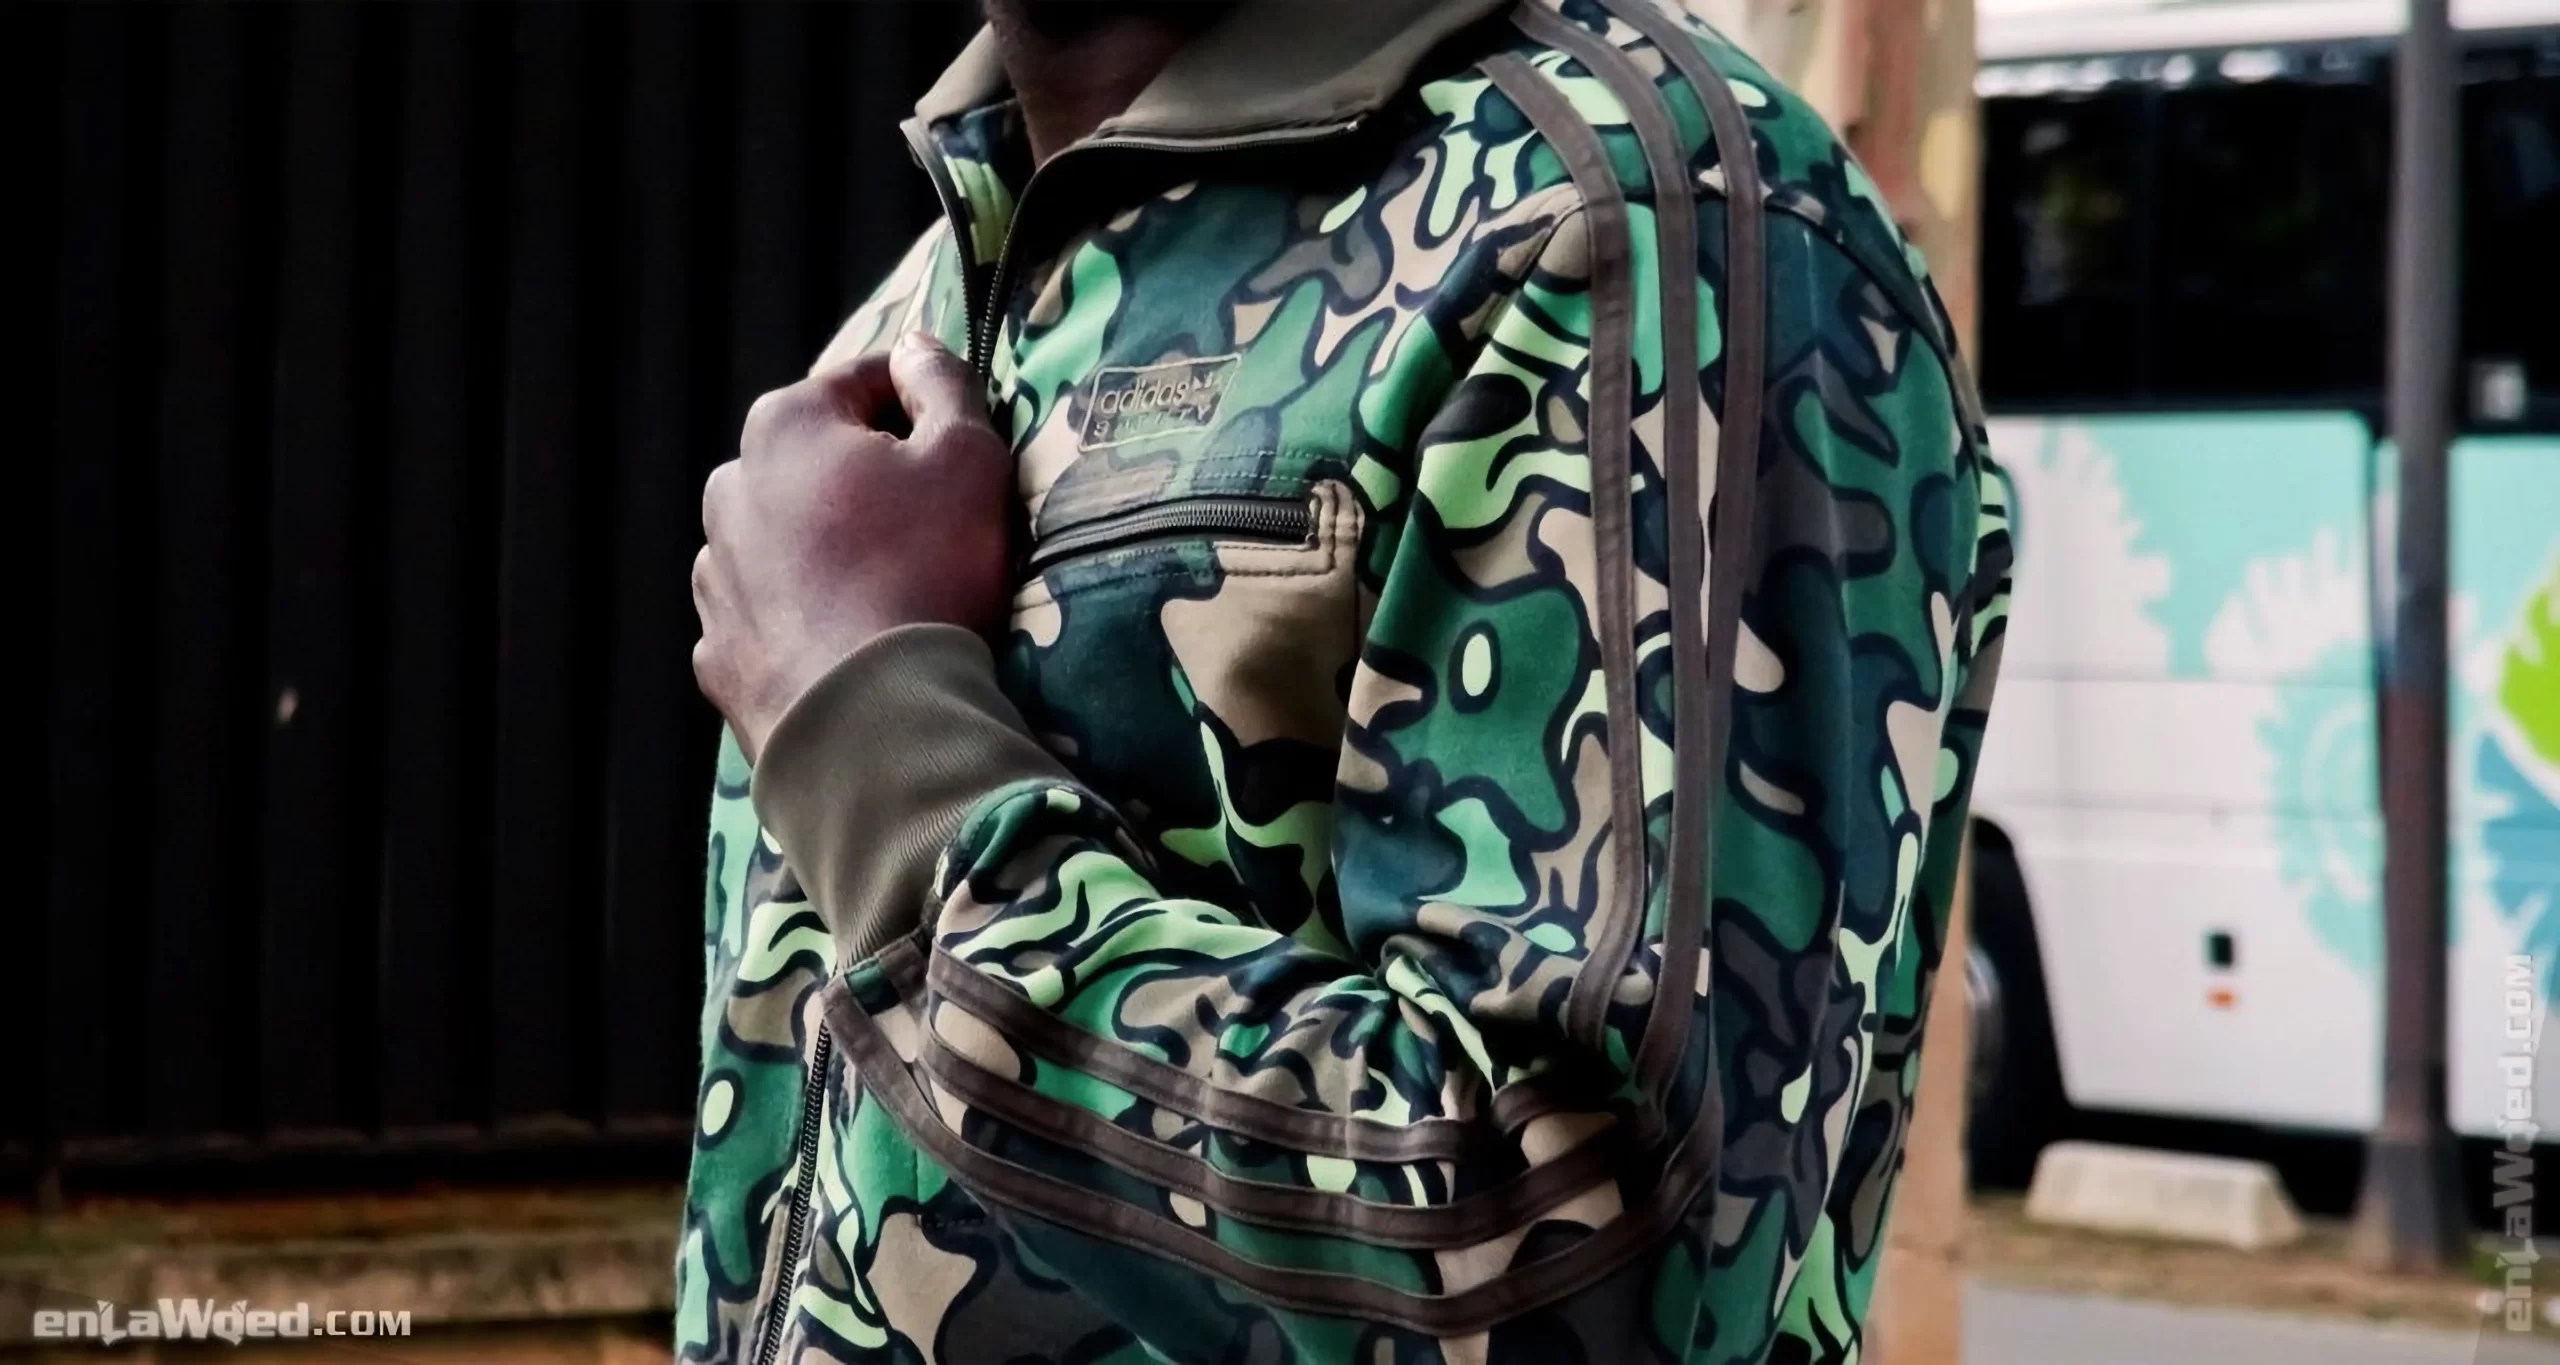 Men’s 2006 Adidas Originals Green Safety Camo Track Top: Resourceful (EnLawded.com file #lmchil4vy2yx4z8ls8k)